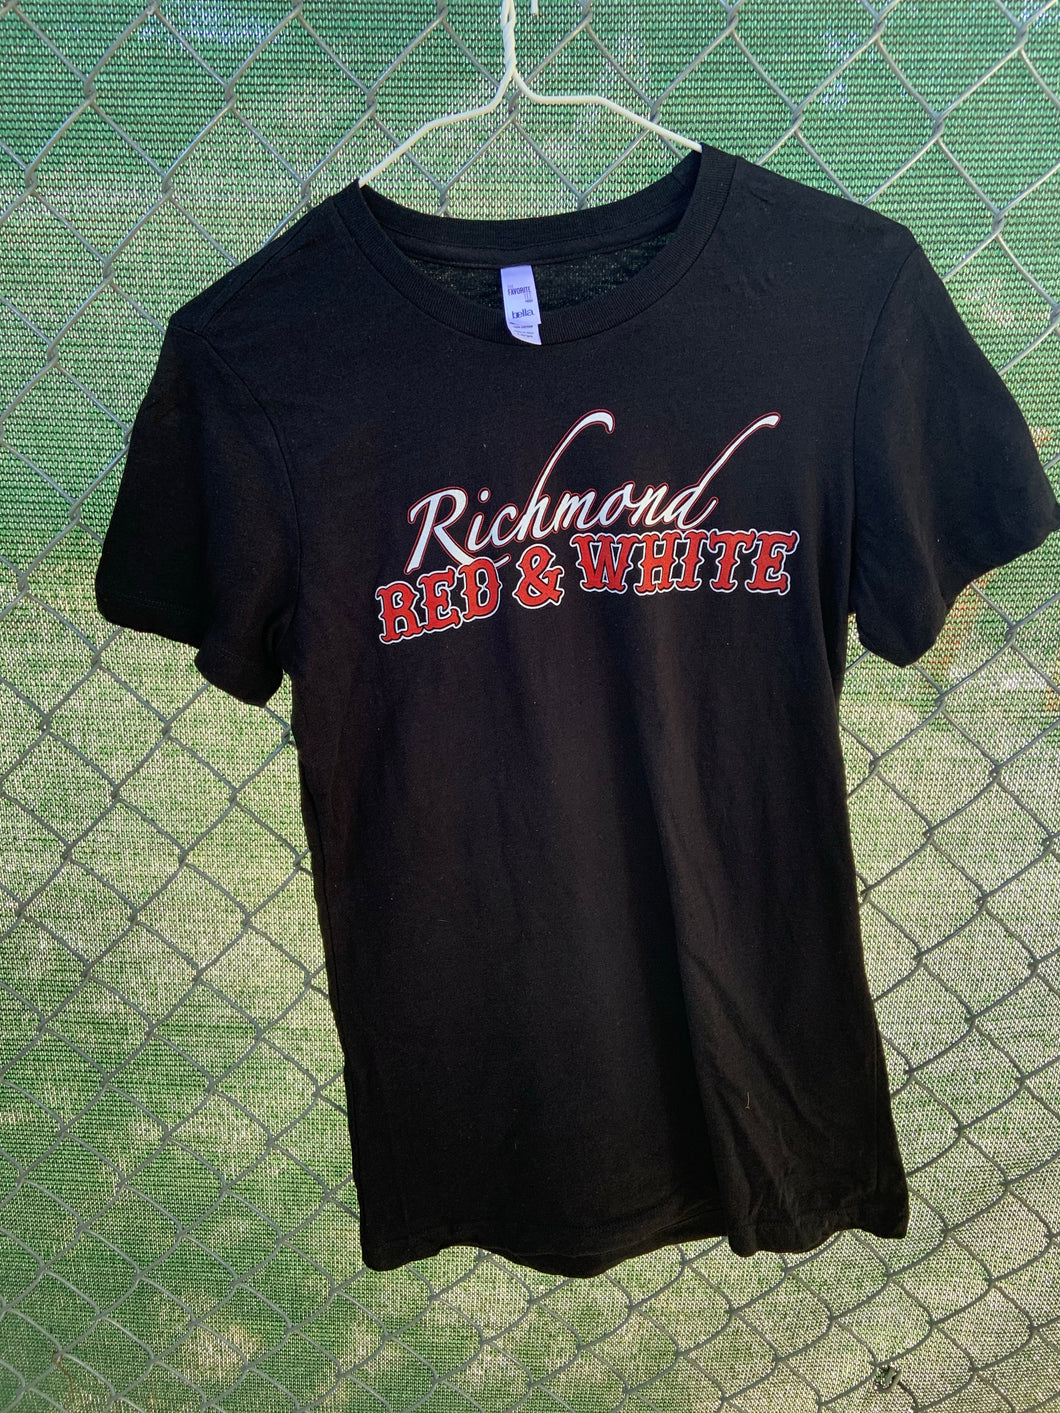 Black t shirt with richmond red and white on front